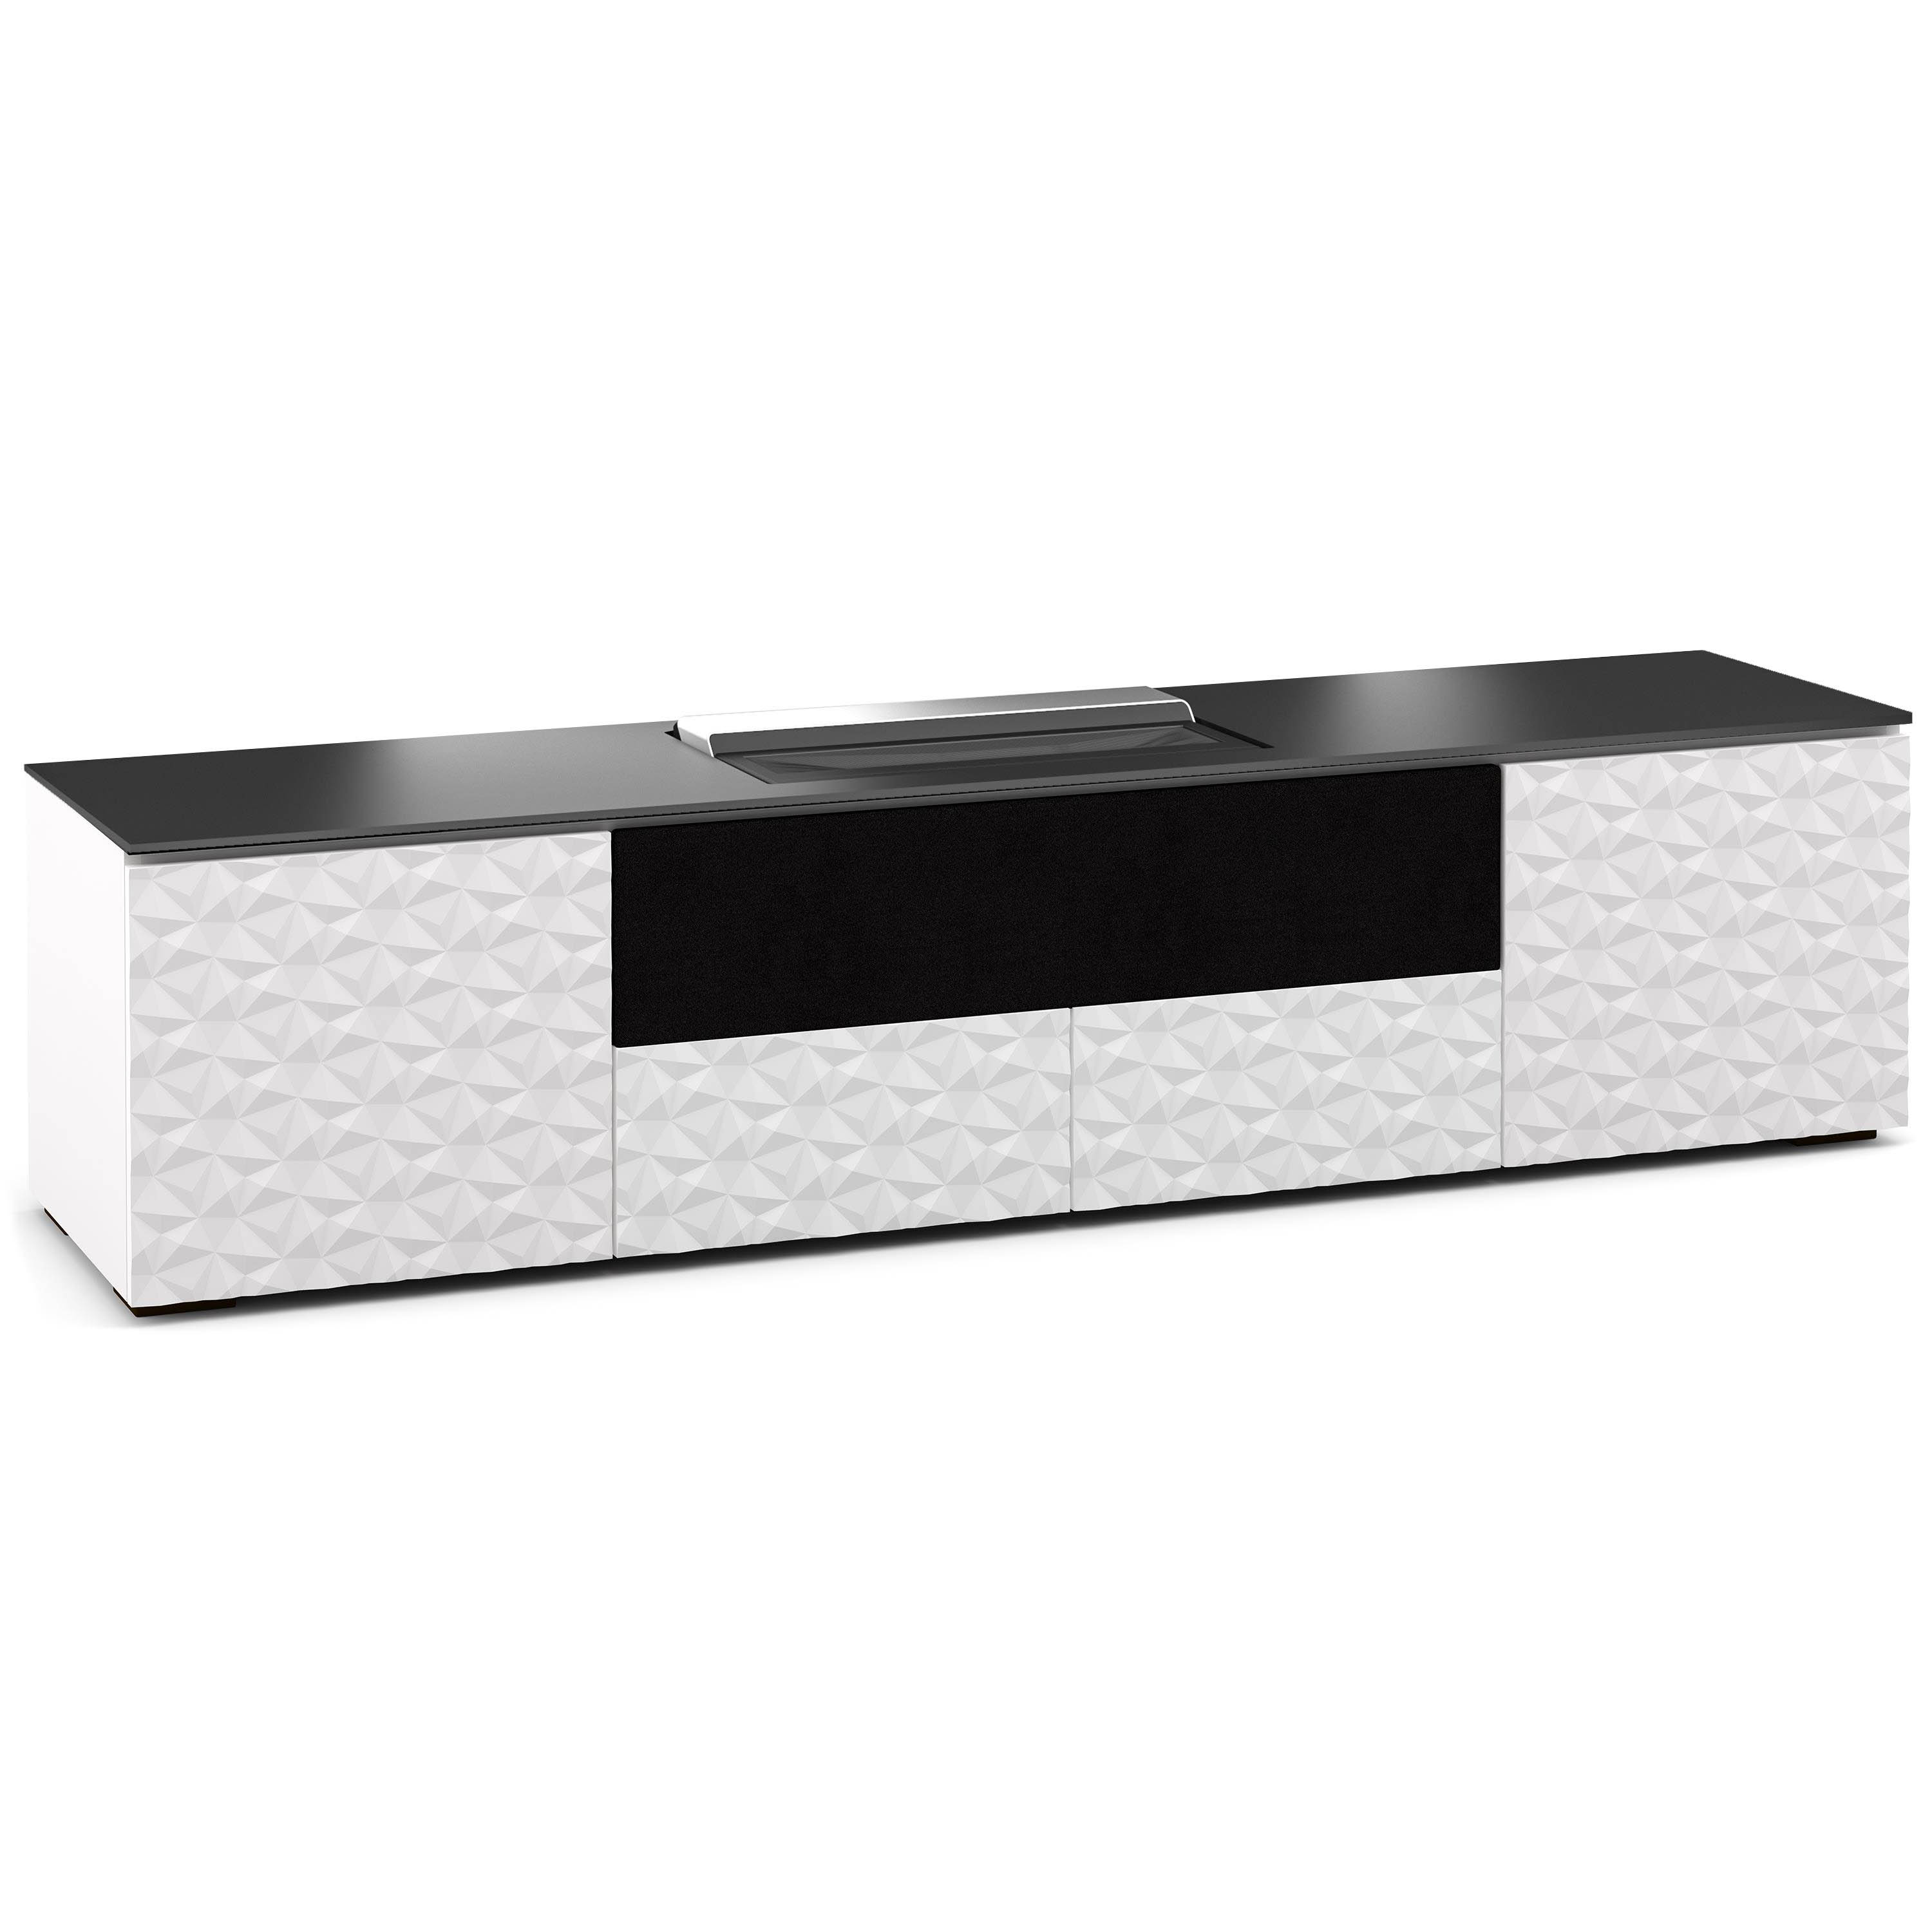 Salamander Designs Milan 245 Cabinet for integrated Hisense 100L8D UST Projector - Gloss White - X/HSE245ML/GW